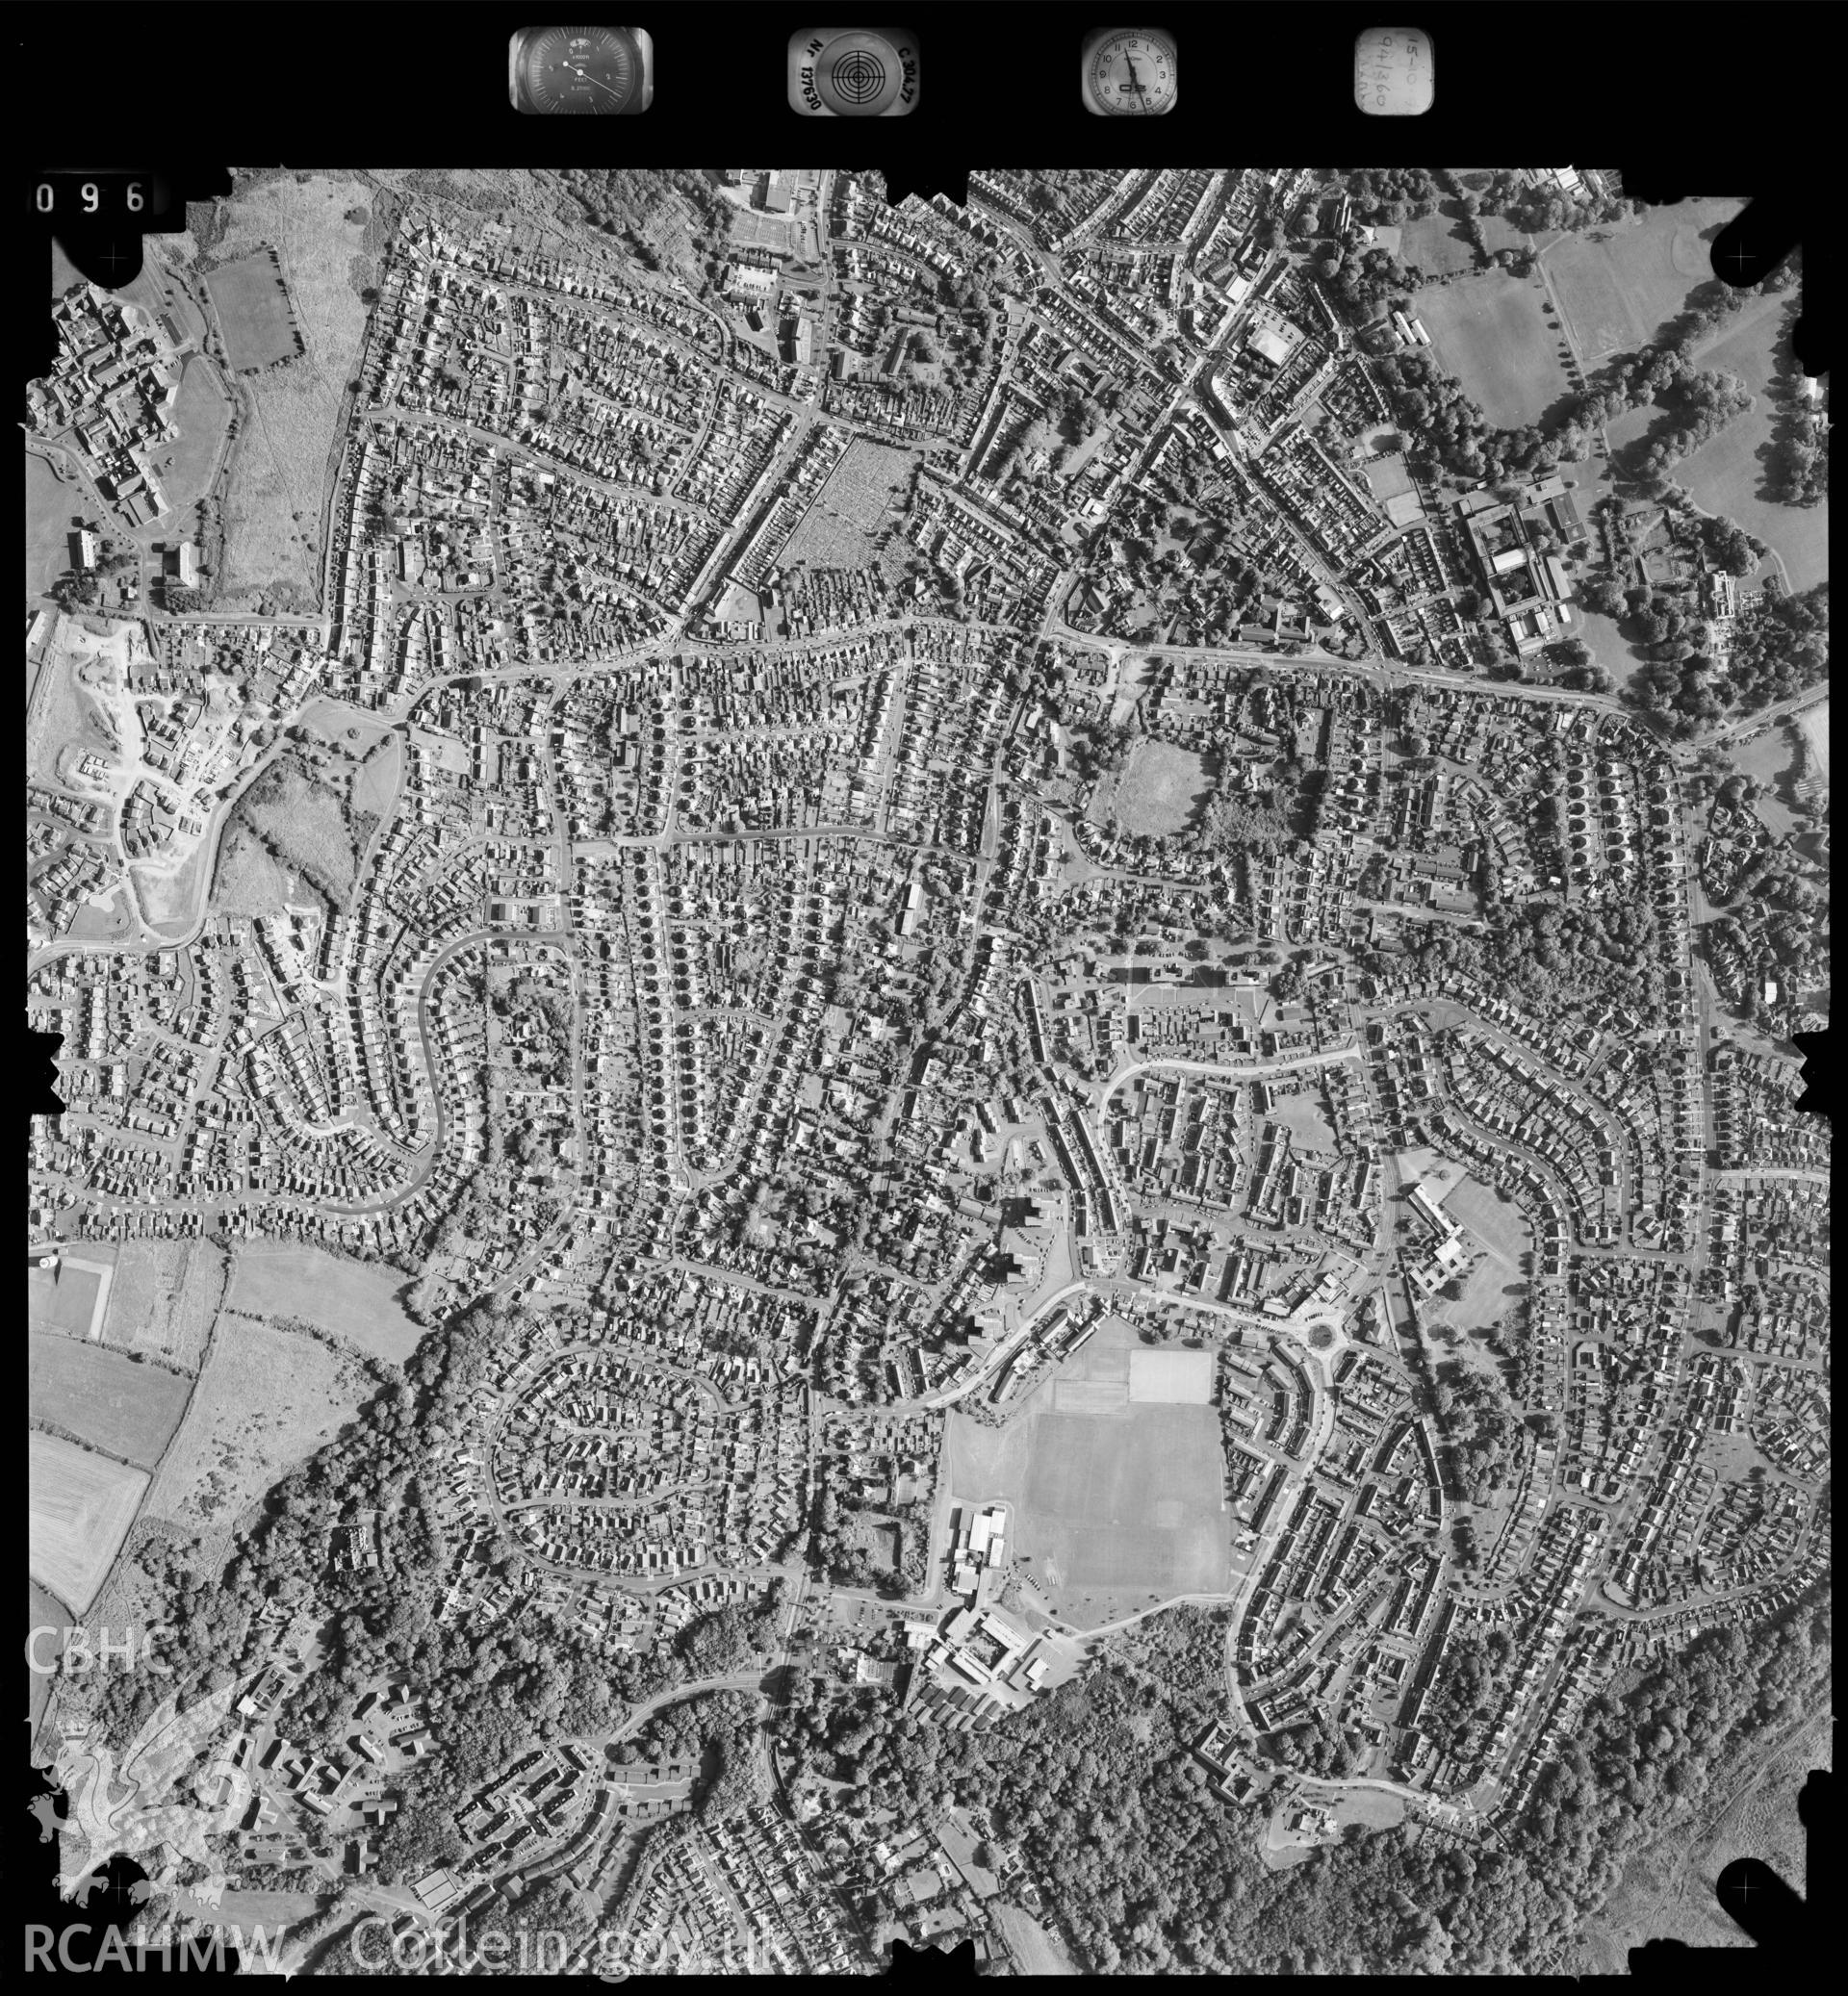 Digitized copy of an aerial photograph showing the Carnglas area, taken by Ordnance Survey, 1994.